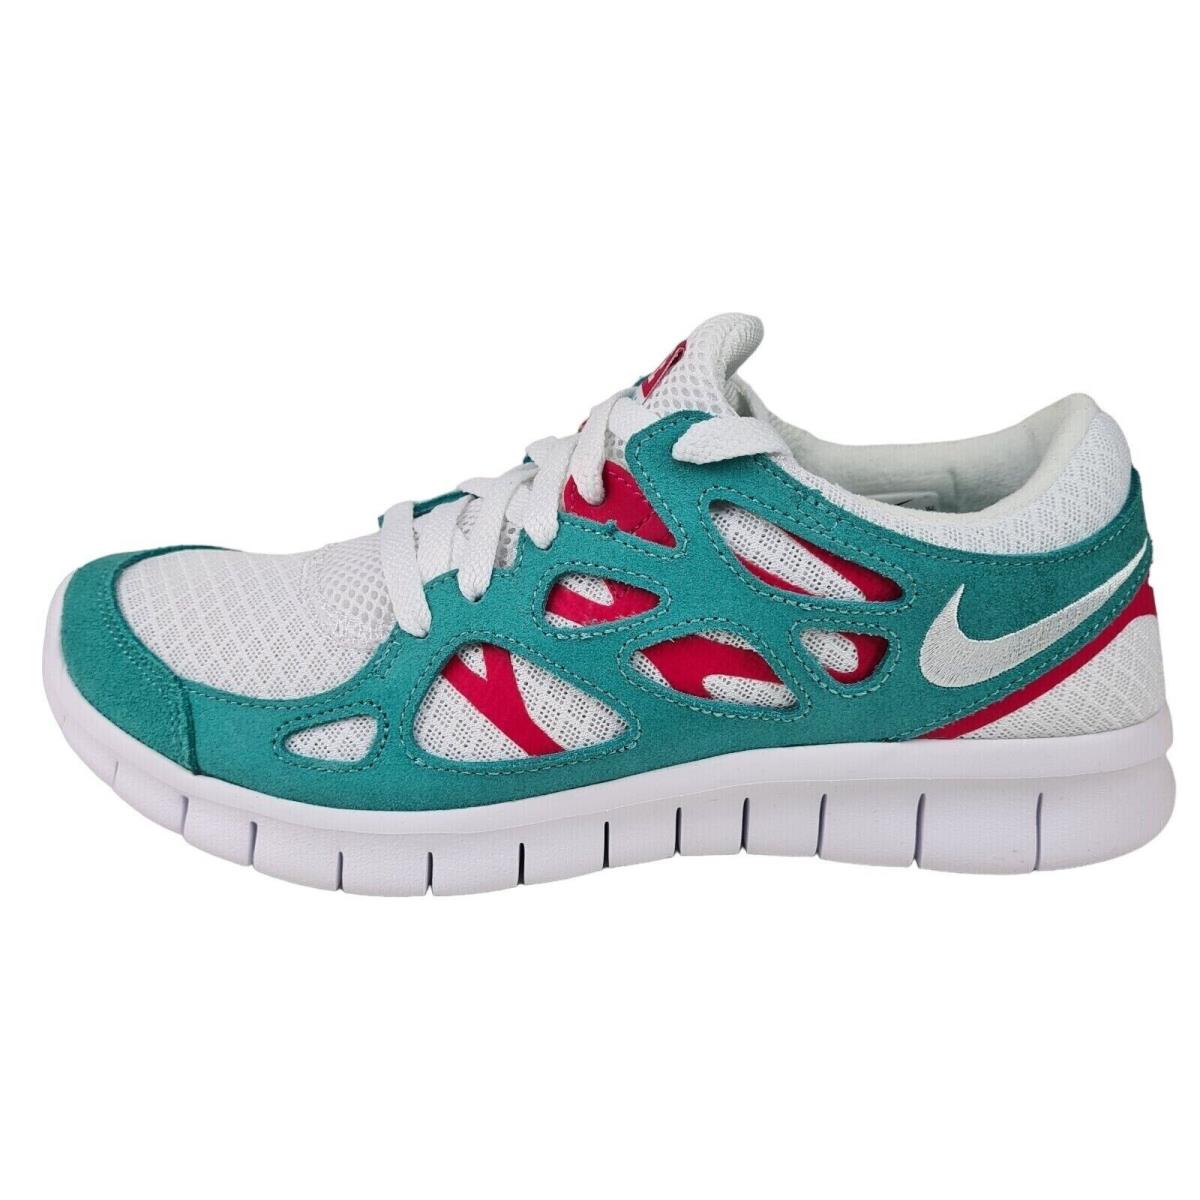 Nike Men`s Free Run 2 Shoes DR9877 100 Sneakers Athletic White Teal Sz 8